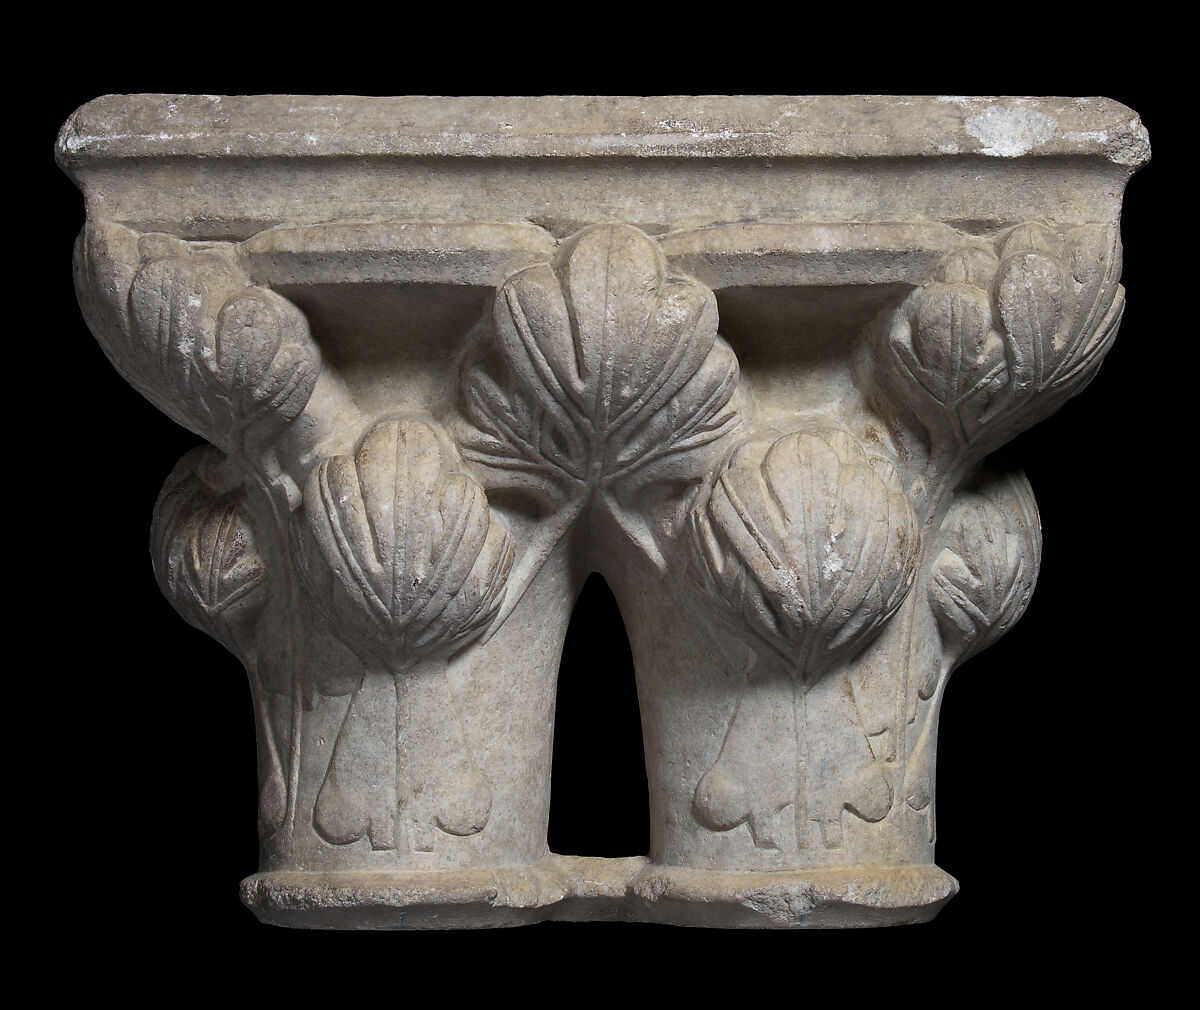 Double Capital, Limestone or sandstone, French 